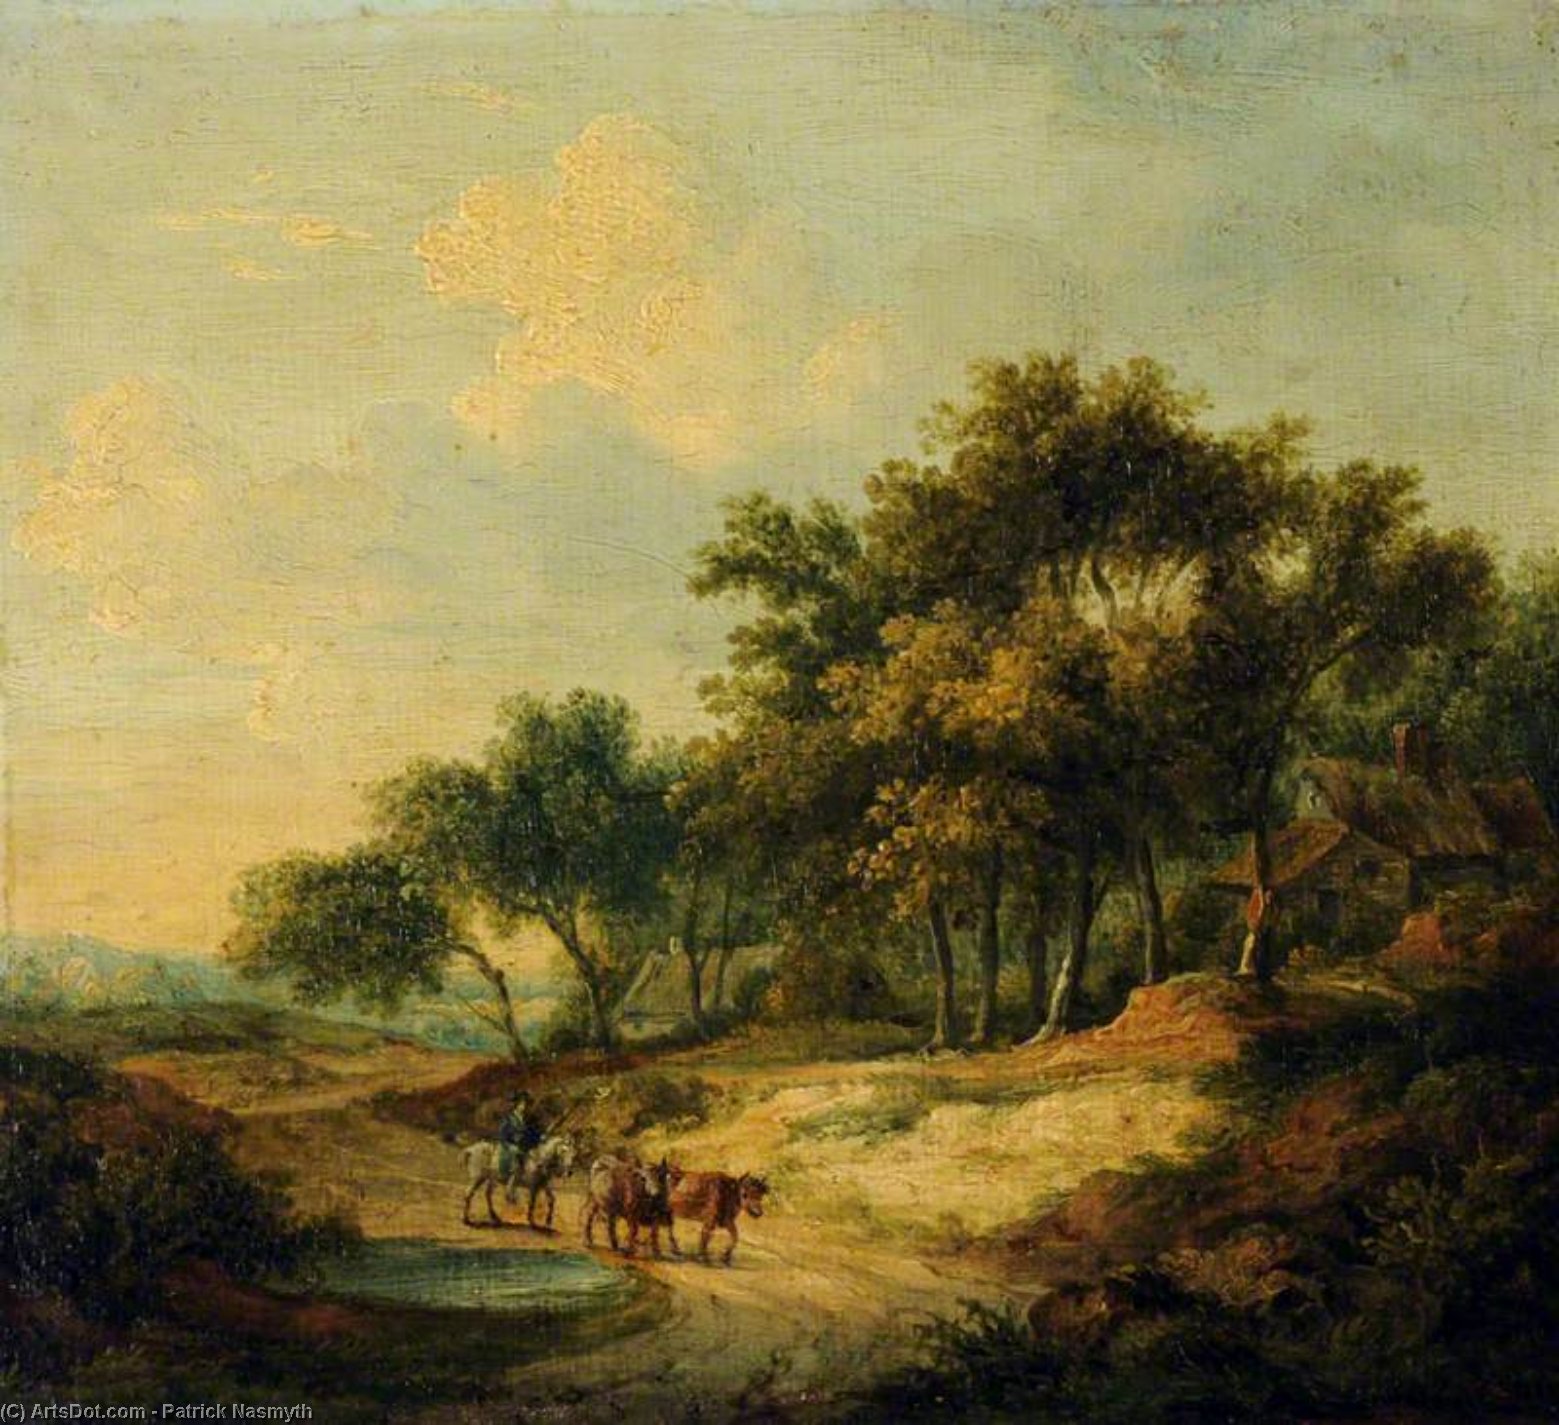 Buy Museum Art Reproductions Landscape With A Figure On Horseback And Cattle by Patrick Nasmyth (1787-1831, United Kingdom) | ArtsDot.com